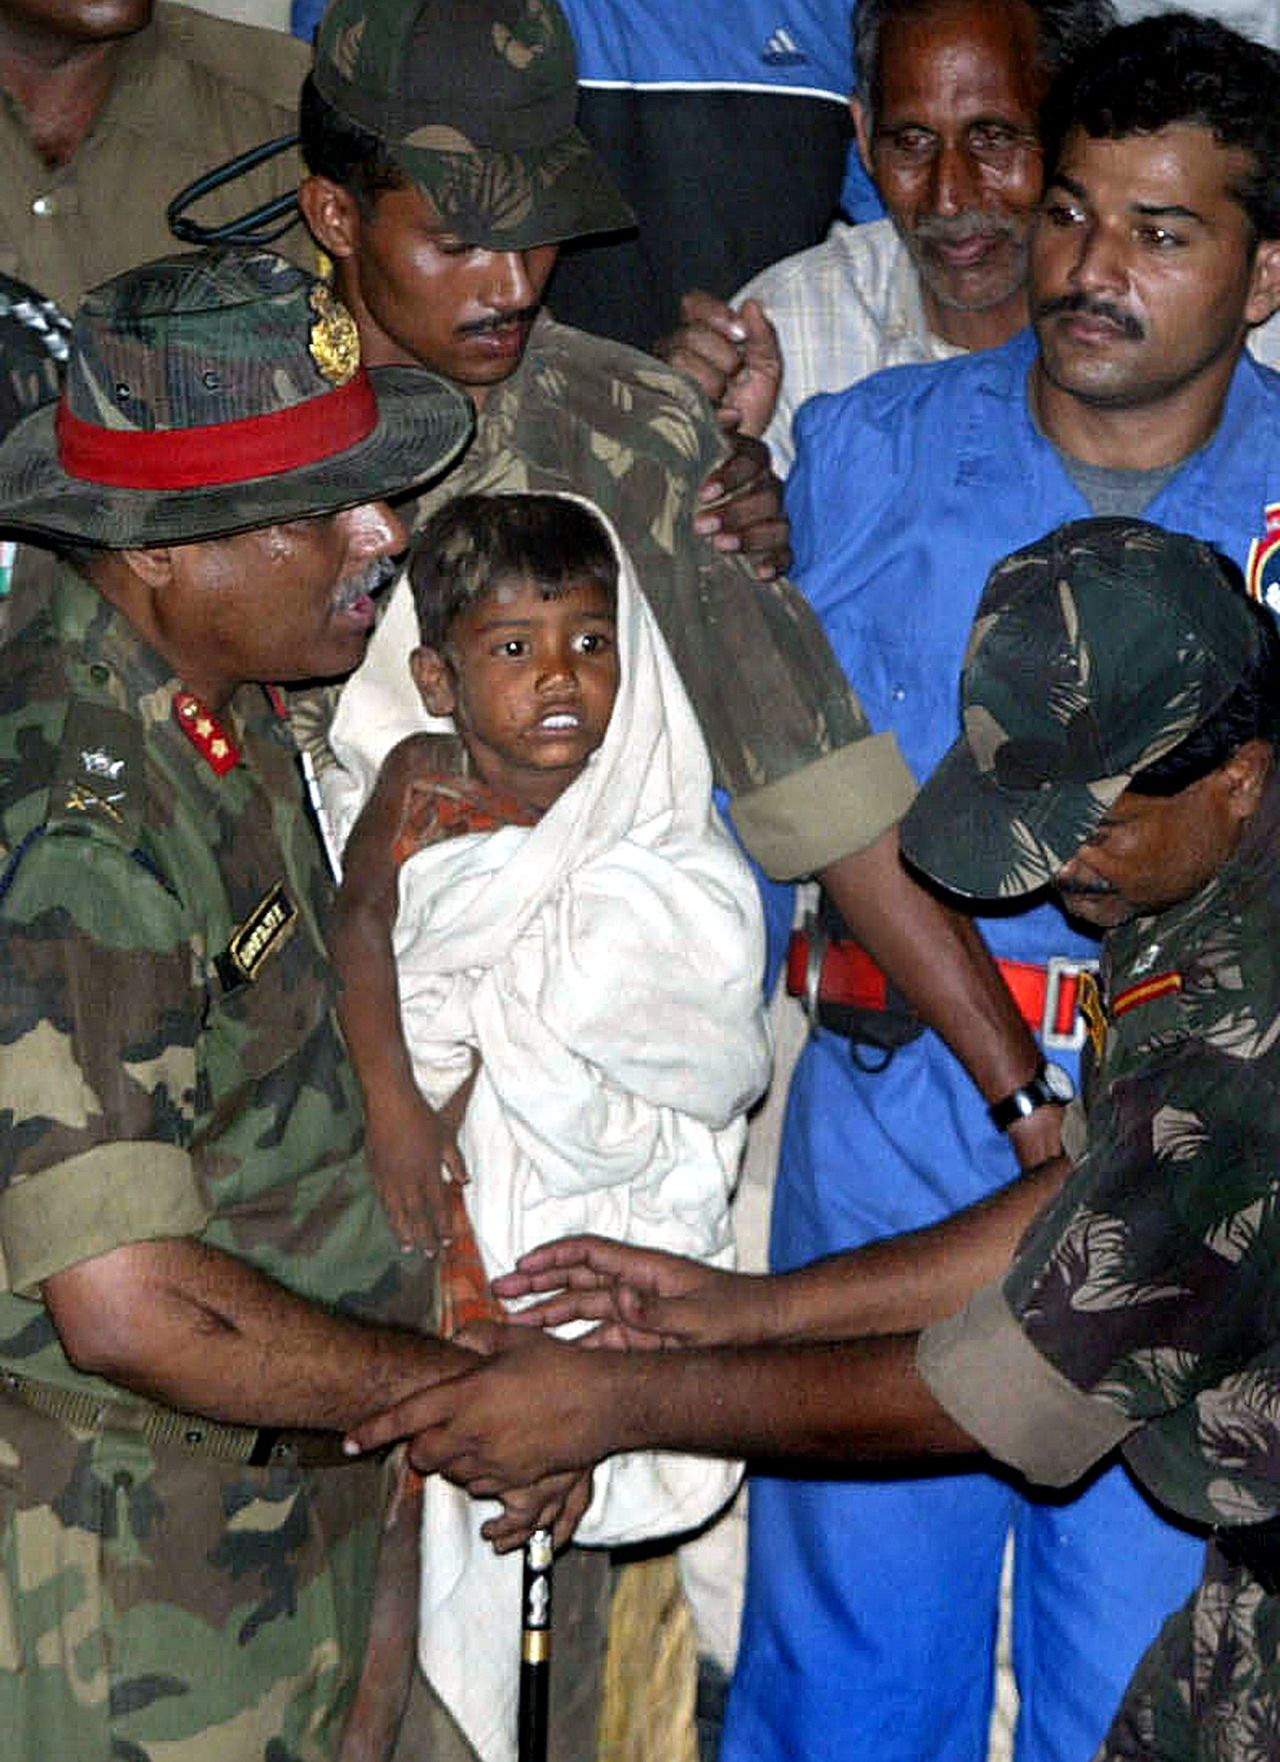 ** ALTERNATE CROP ** Soldiers carry Prince, 6, after he was rescued from an 18-meter-deep (60-foot-deep) hole, at Aldeharhi, in the northern Indian state of Haryana, Sunday, July 23, 2006. Soldiers carried a 5-year-old boy back to ground level Sunday, bringing to an end the child's 50-hour ordeal. The Indian nation was gripped by the dramatic rescue with some channels suspending regular coverage to devote nearly all their air time to the rescue effort. (AP Photo/Mustafa Quraishi)